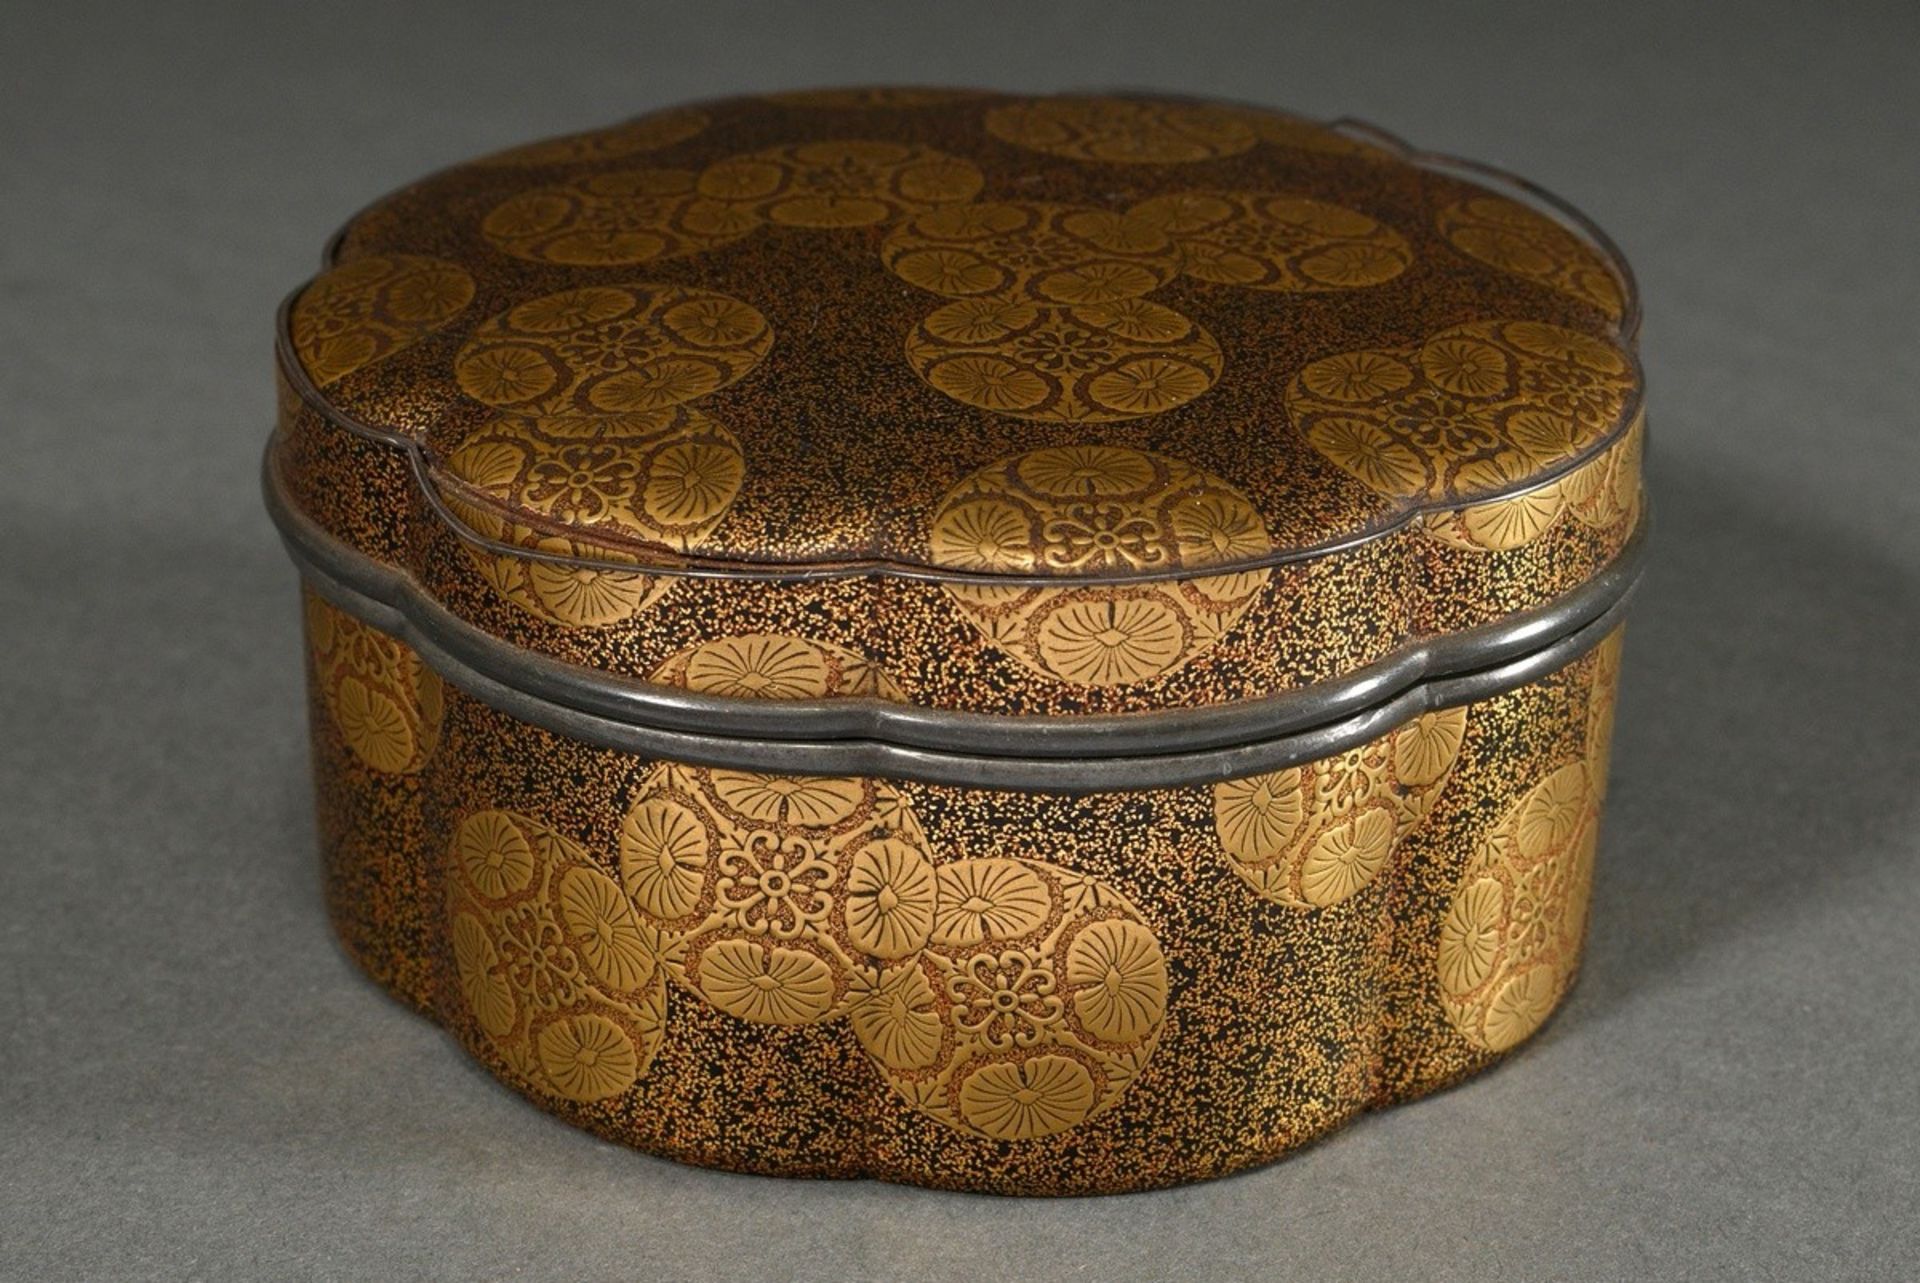 Flower-shaped eight-pass Urushi lacquer box with "Chrysanthemum Mons", loose lead rim on top, Japan - Image 2 of 6